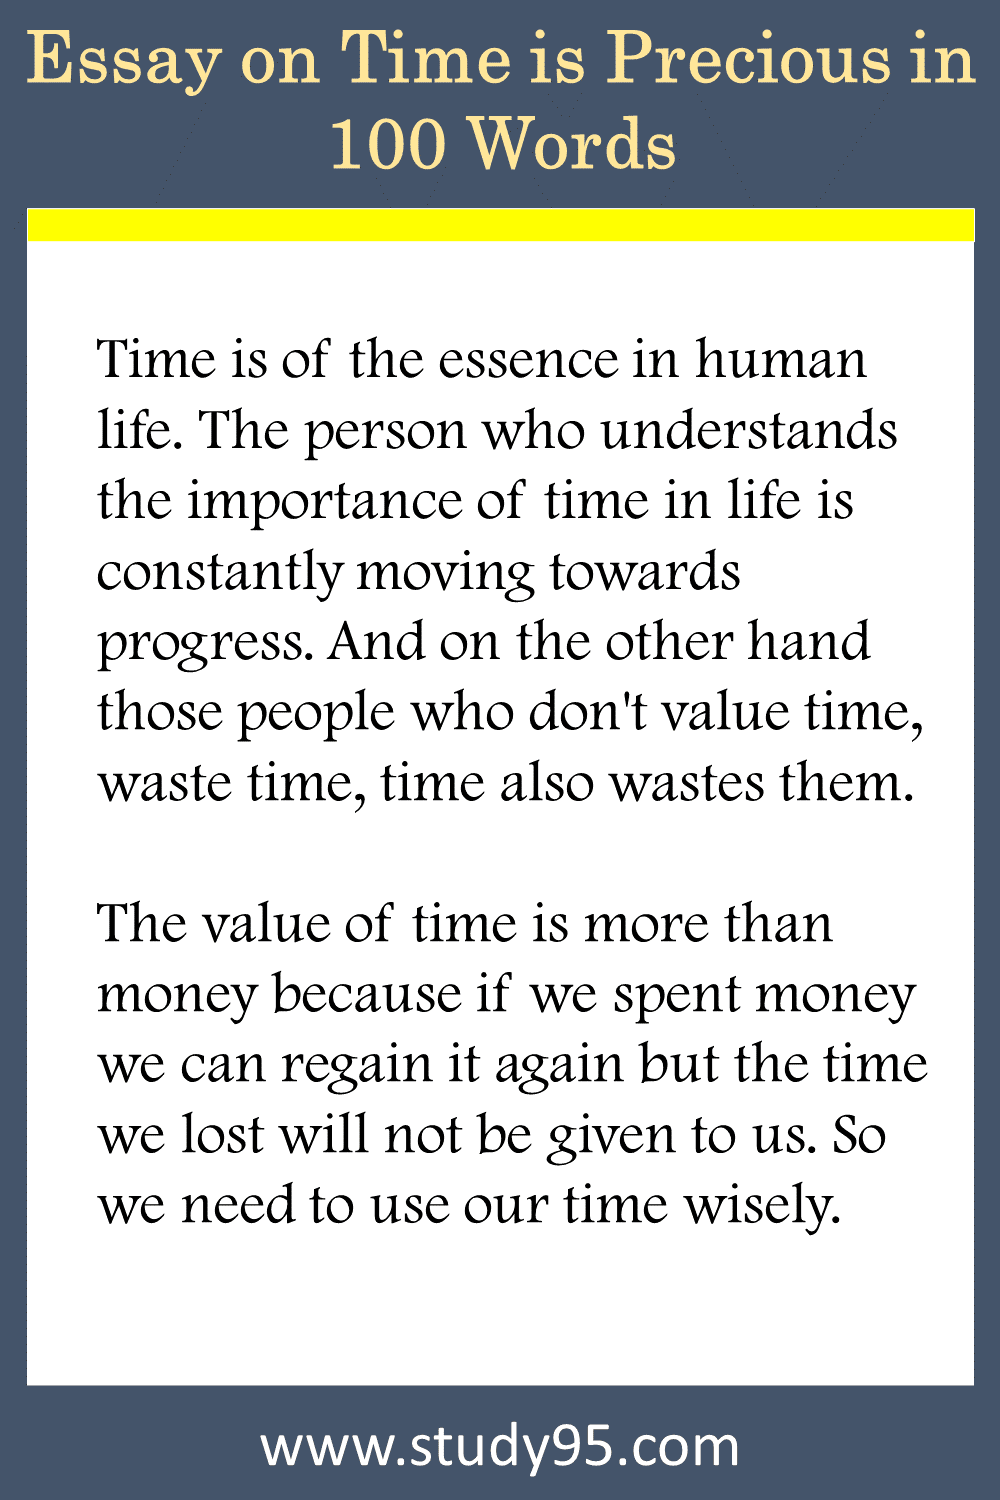 Essay on Time is Precious in 100 Words